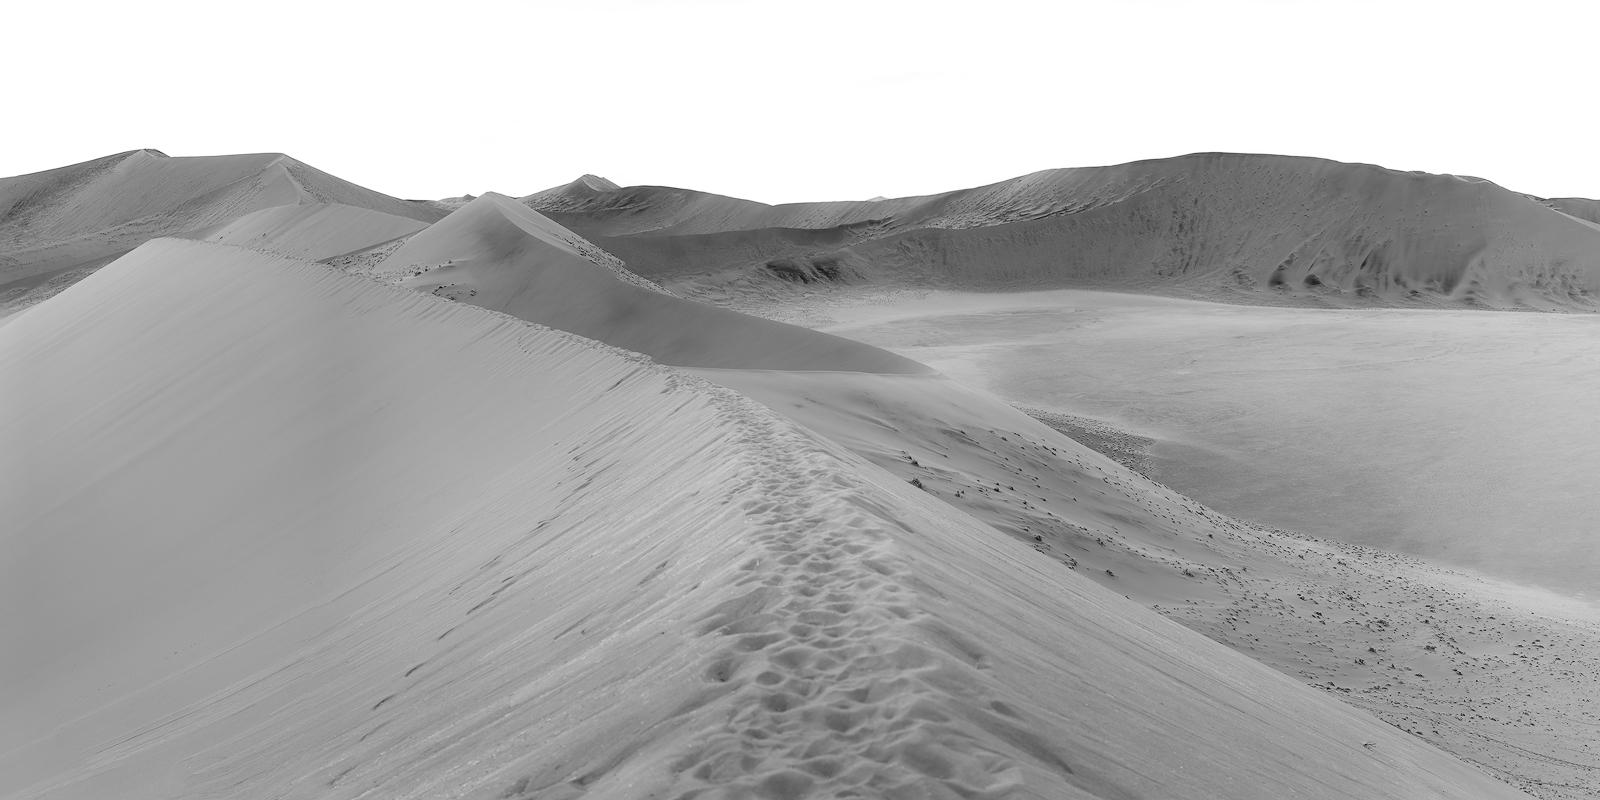 Image from Dunes. The surreal landscape -   